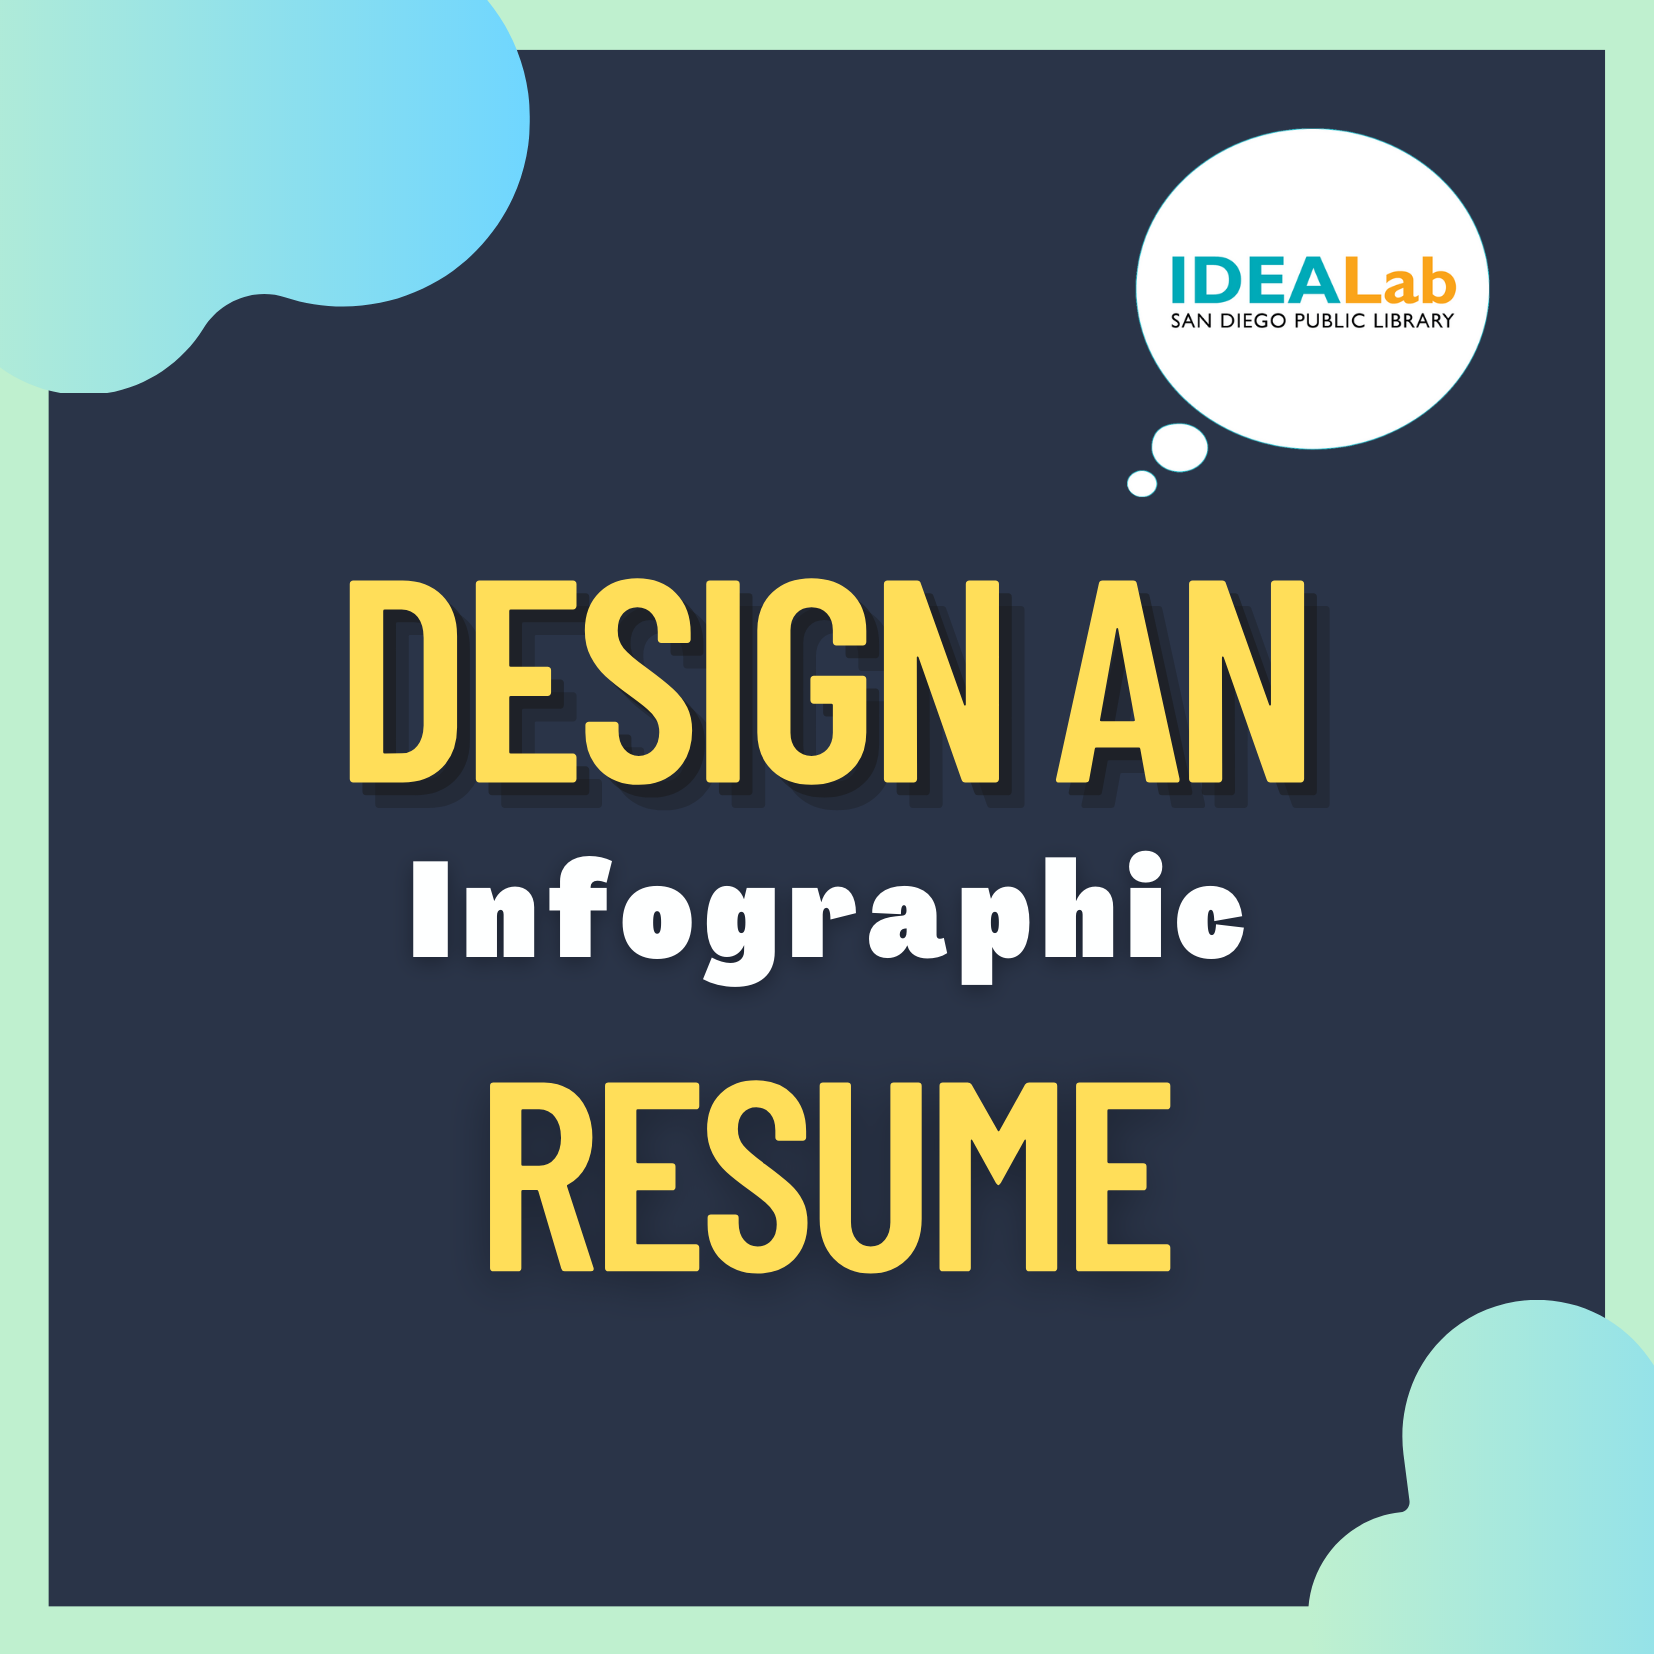 Design an Infographic Resume